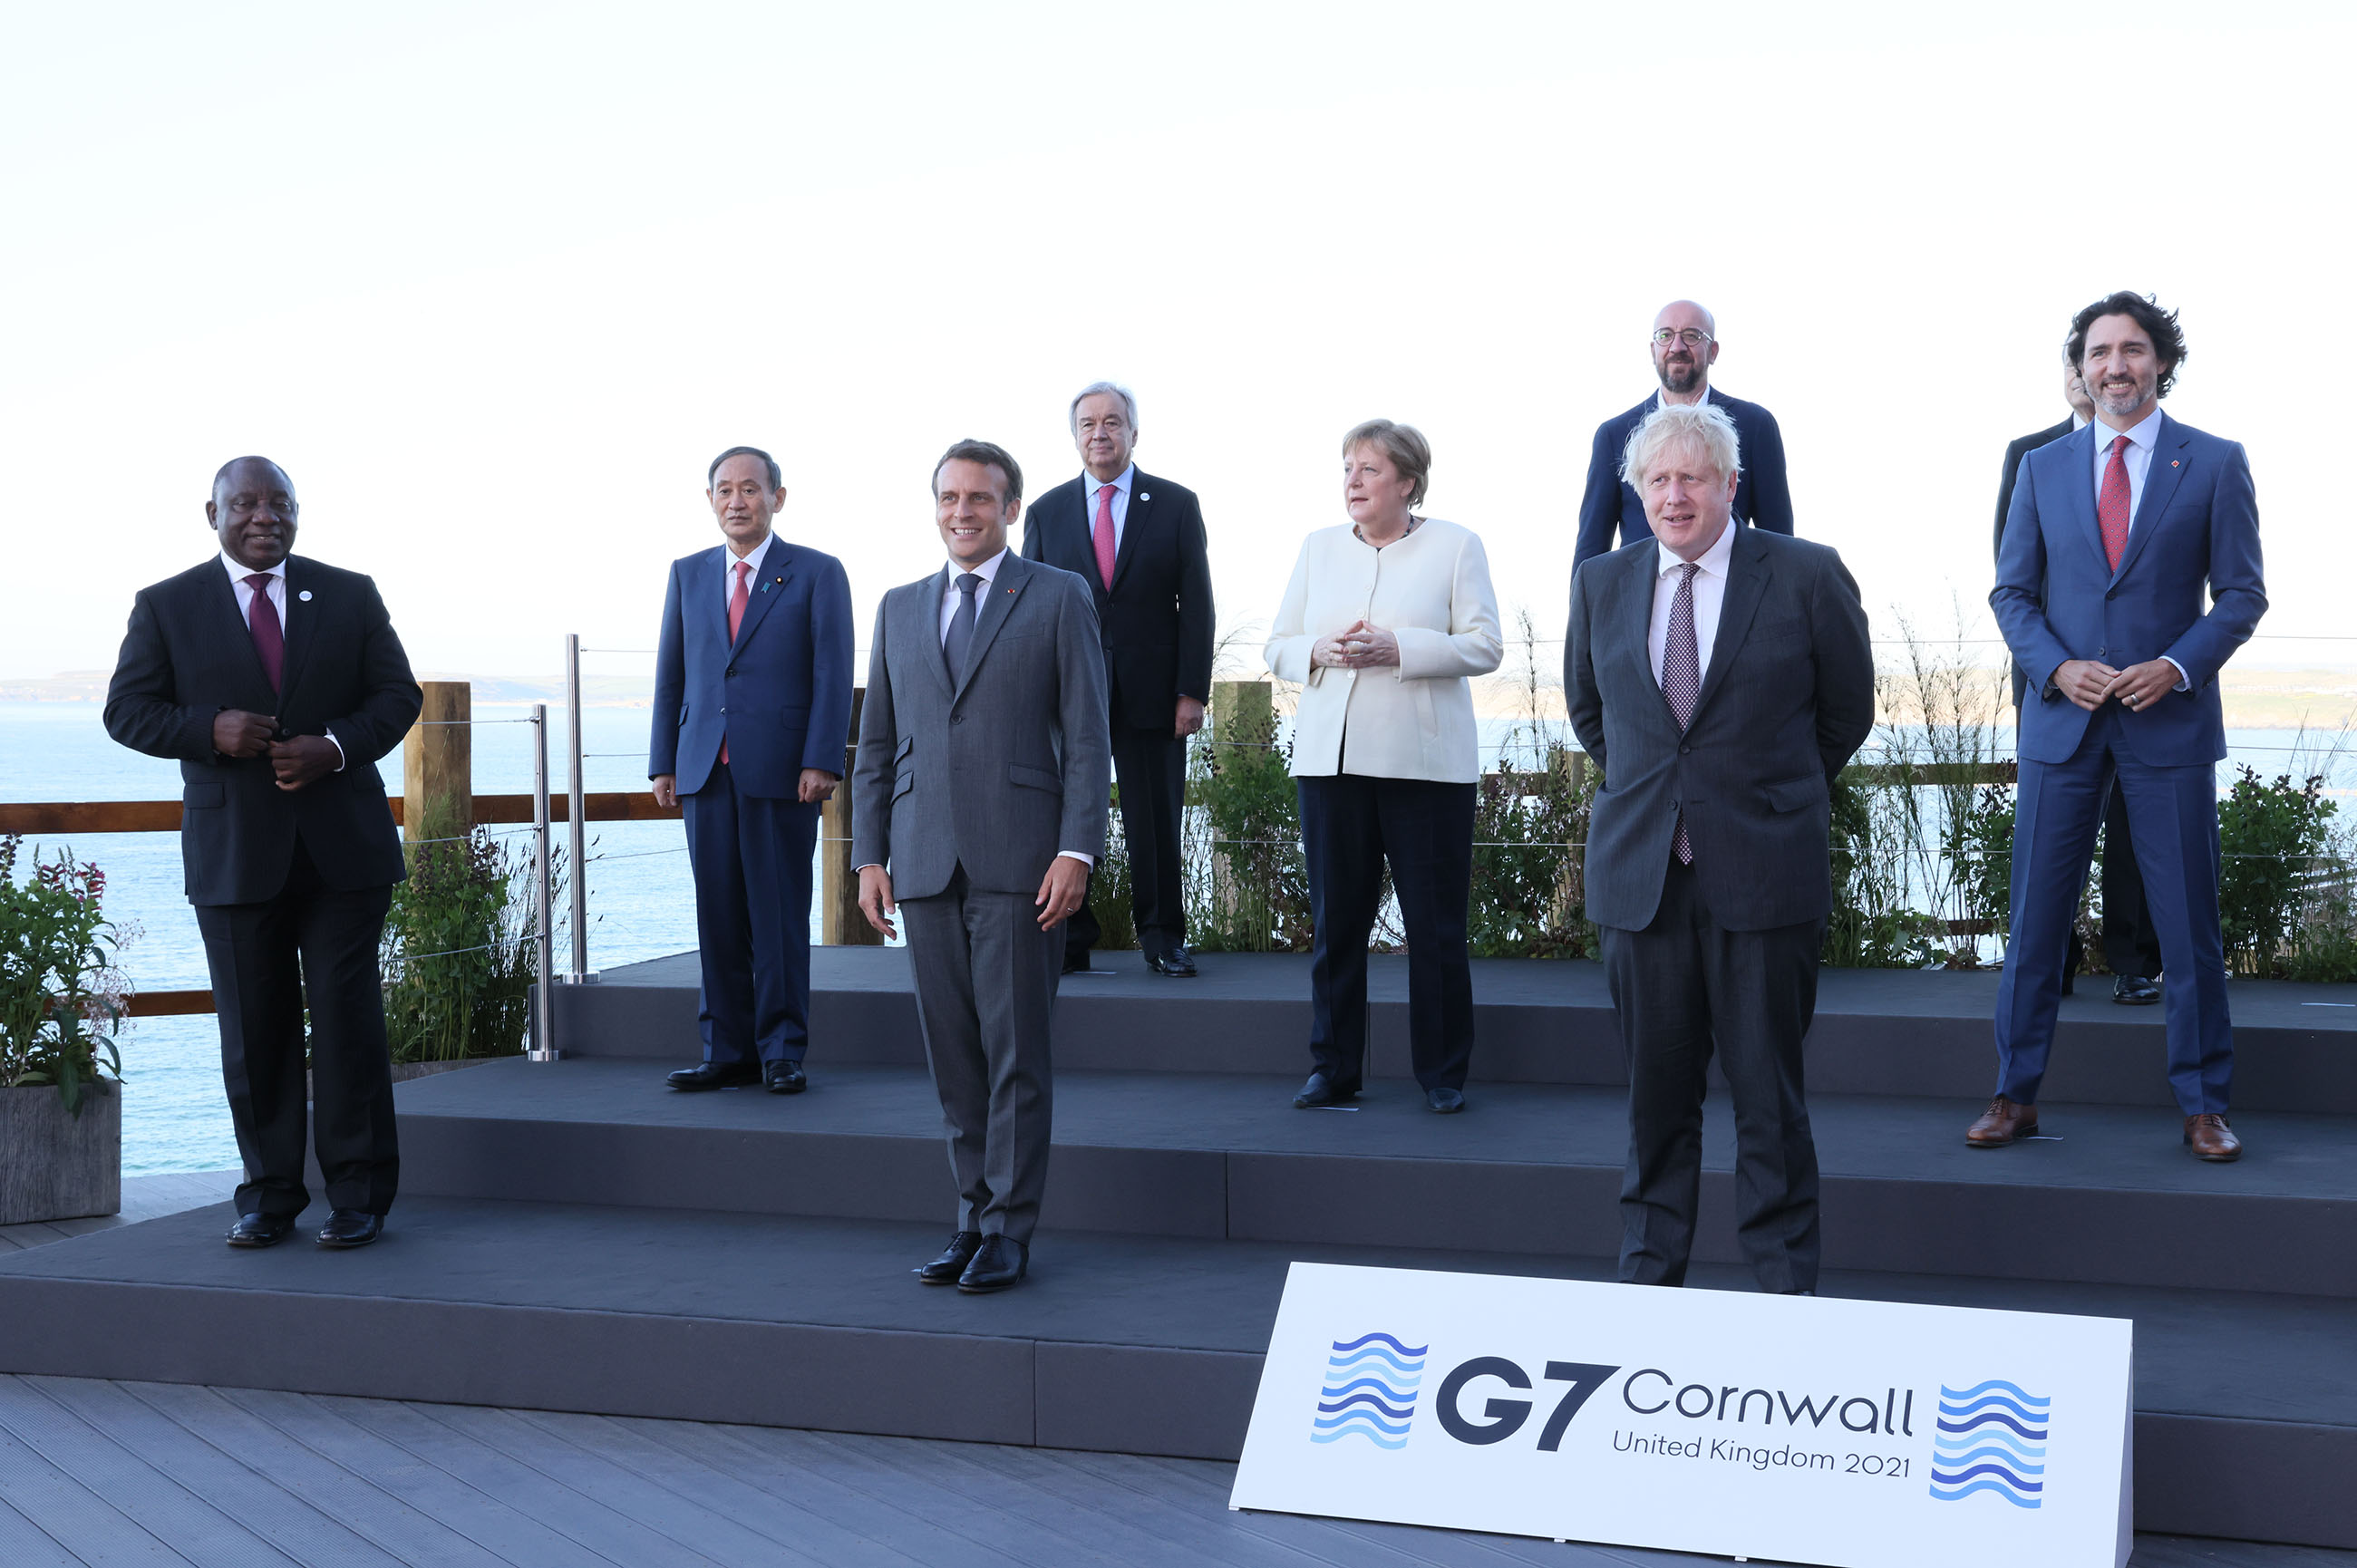 Photograph of the group photograph session with the leaders of the G7 members and guest countries (3)